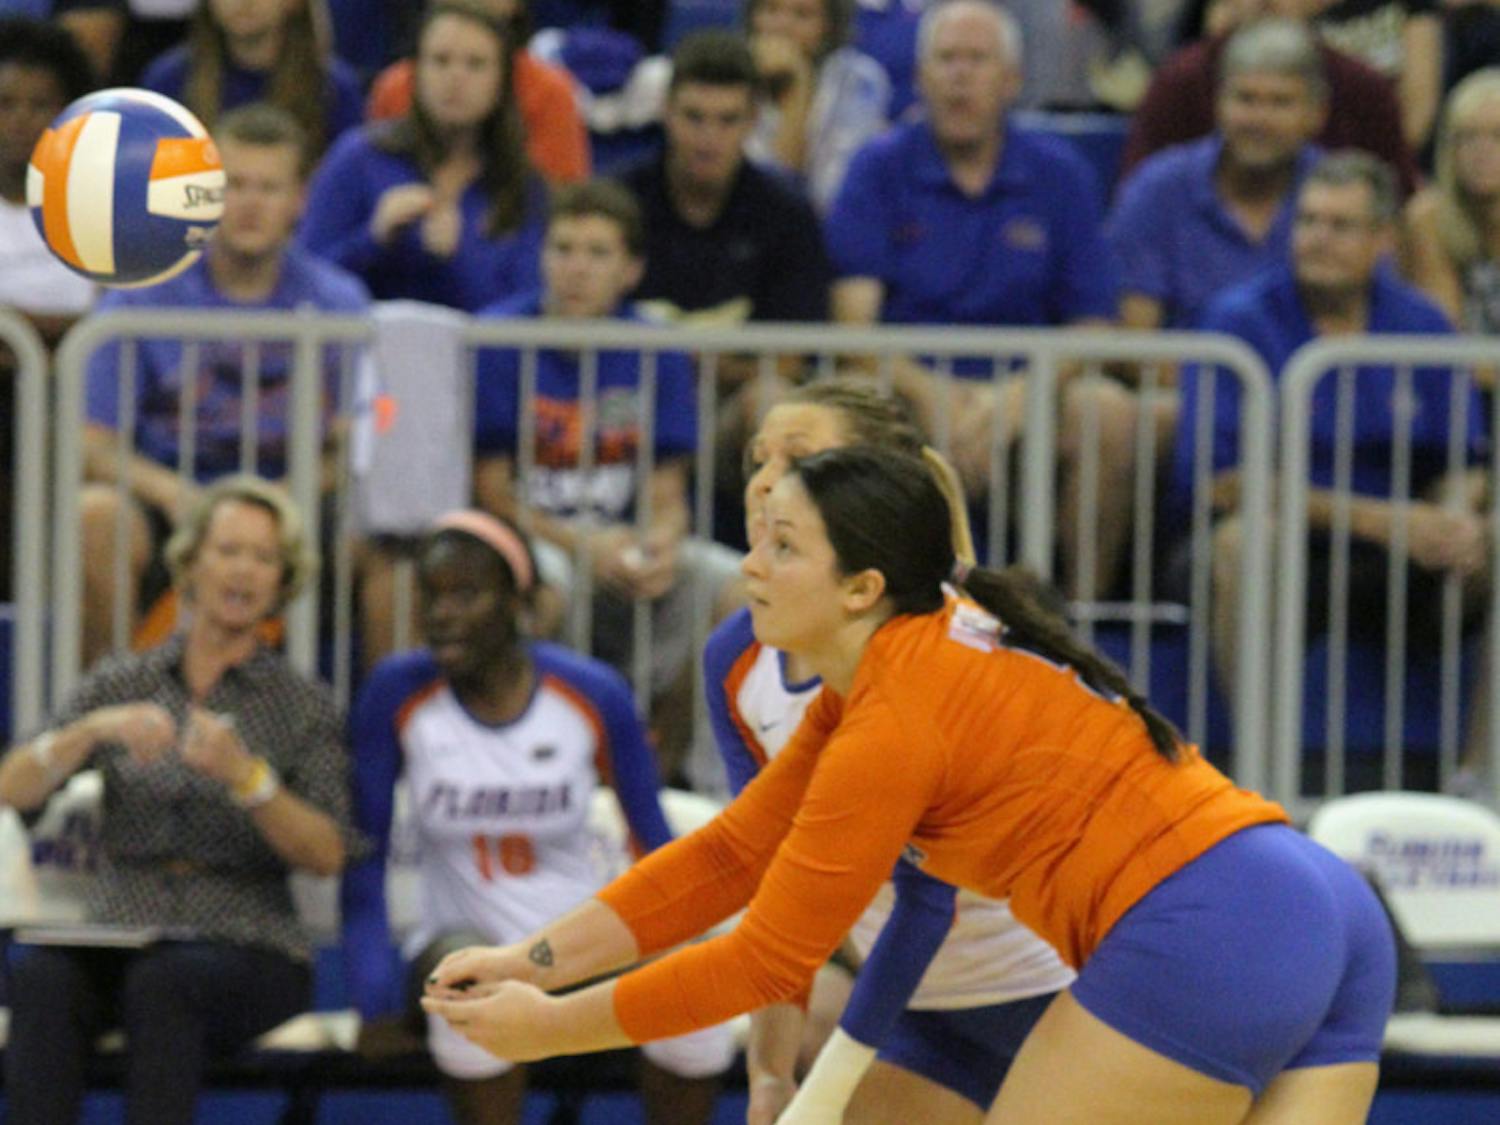 Taylor Unroe reaches for the ball during Florida’s three-set victory against FSU on Tuesday in the O’Connell Center.